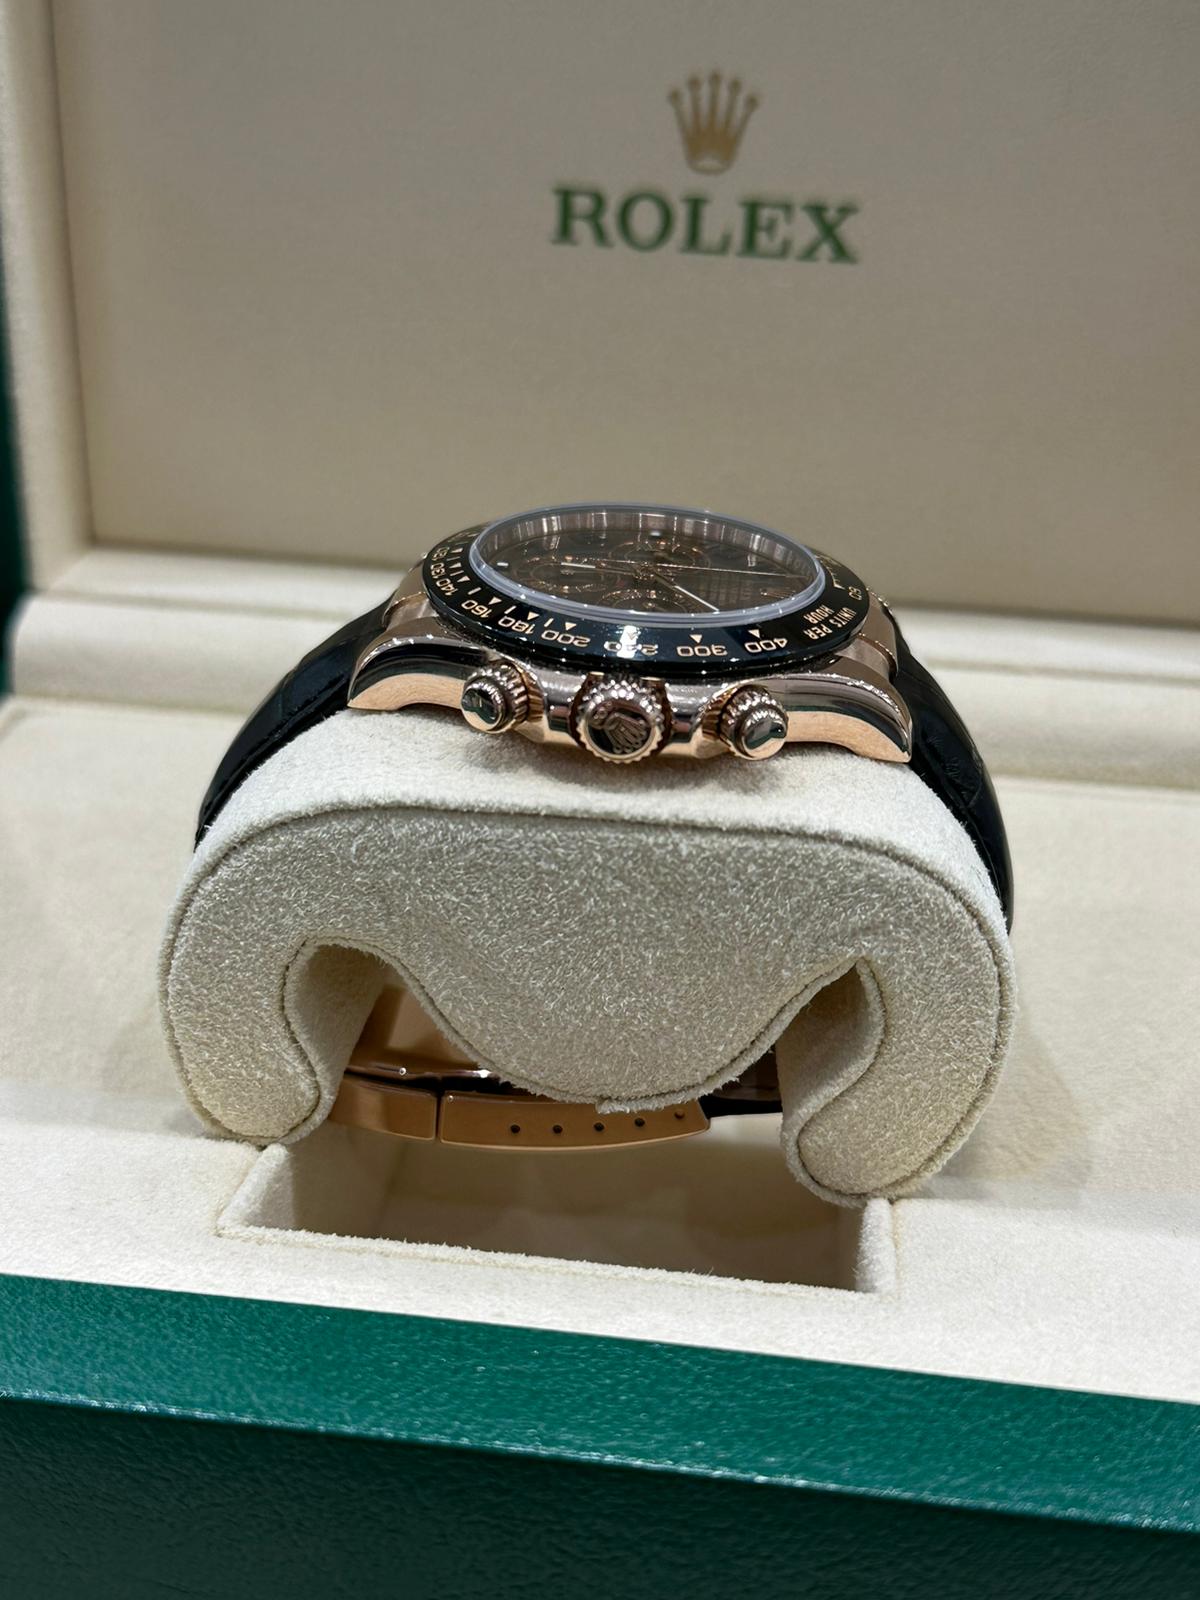 Rolex Daytona Chocolate with Leather bracelet 116515LN 2013 with box and papers. - Image 3 of 8